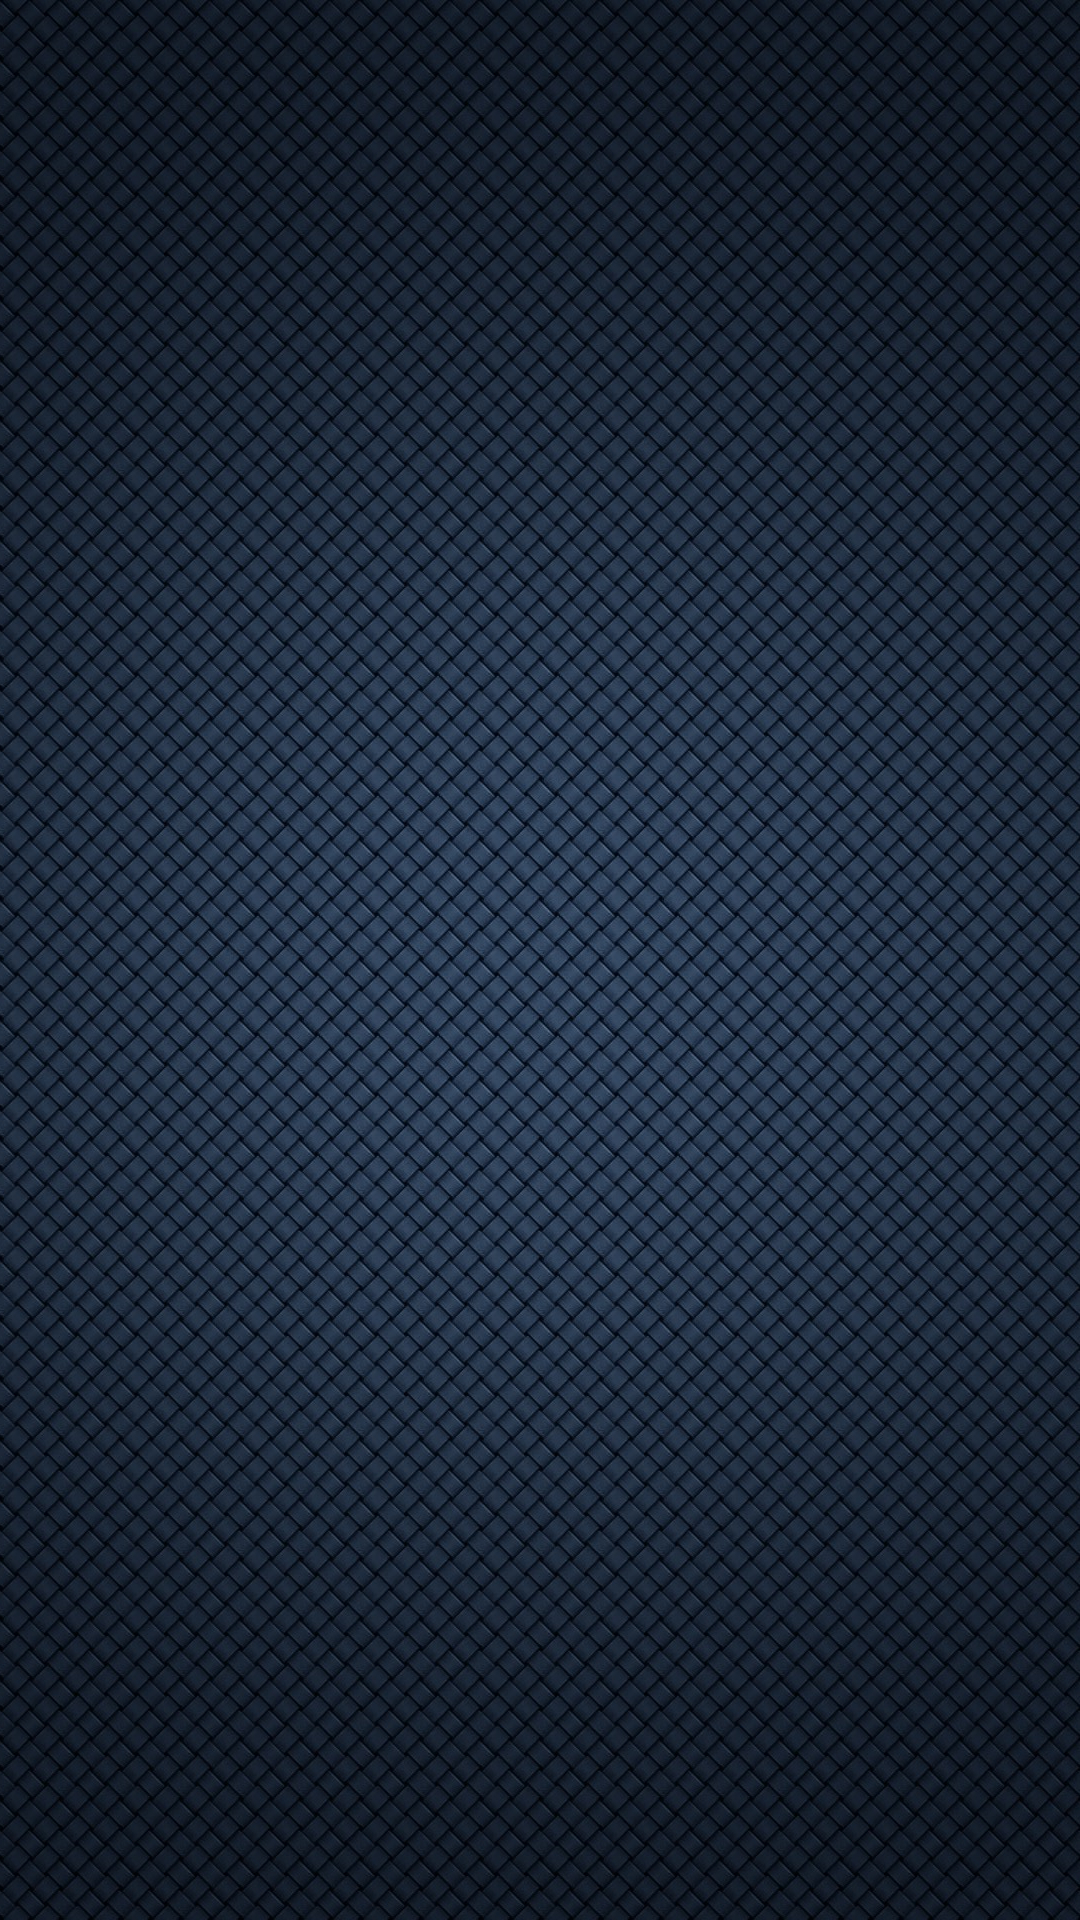 Wallpaper For Galaxy S4 With 3d Blue Shapes In Resolution